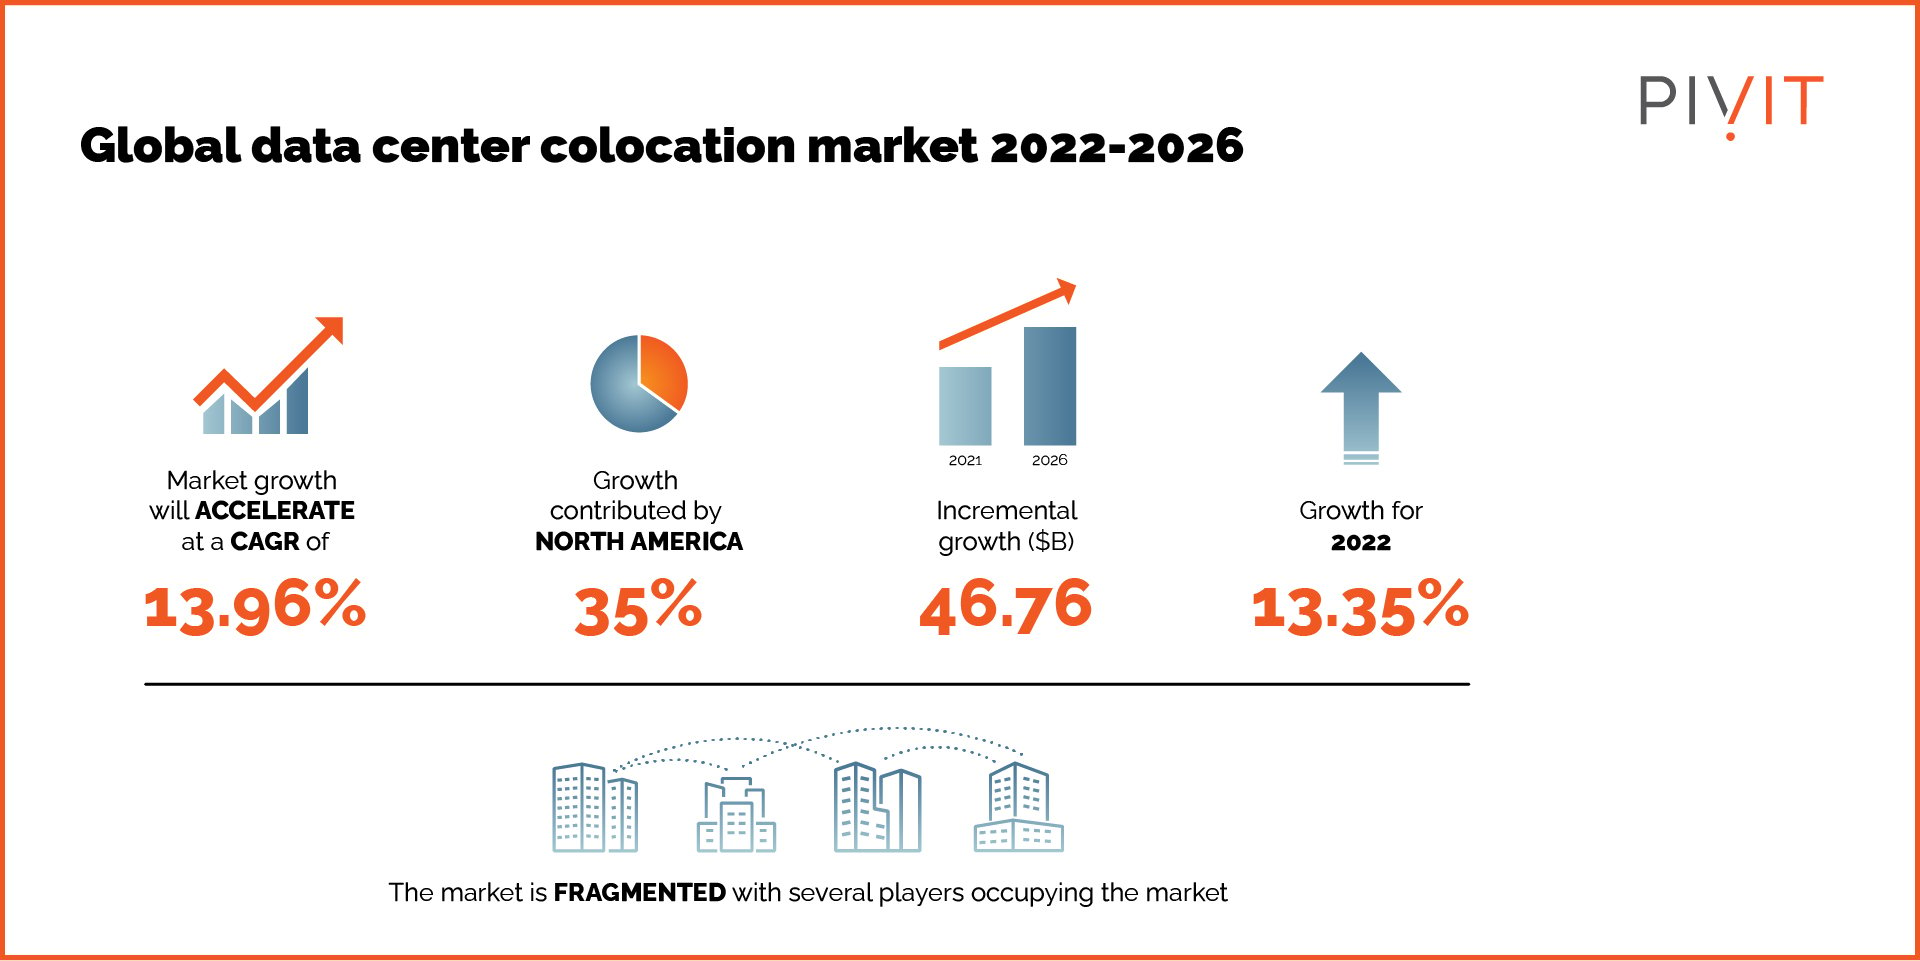 Global data center colocation market from 2022 to 2026